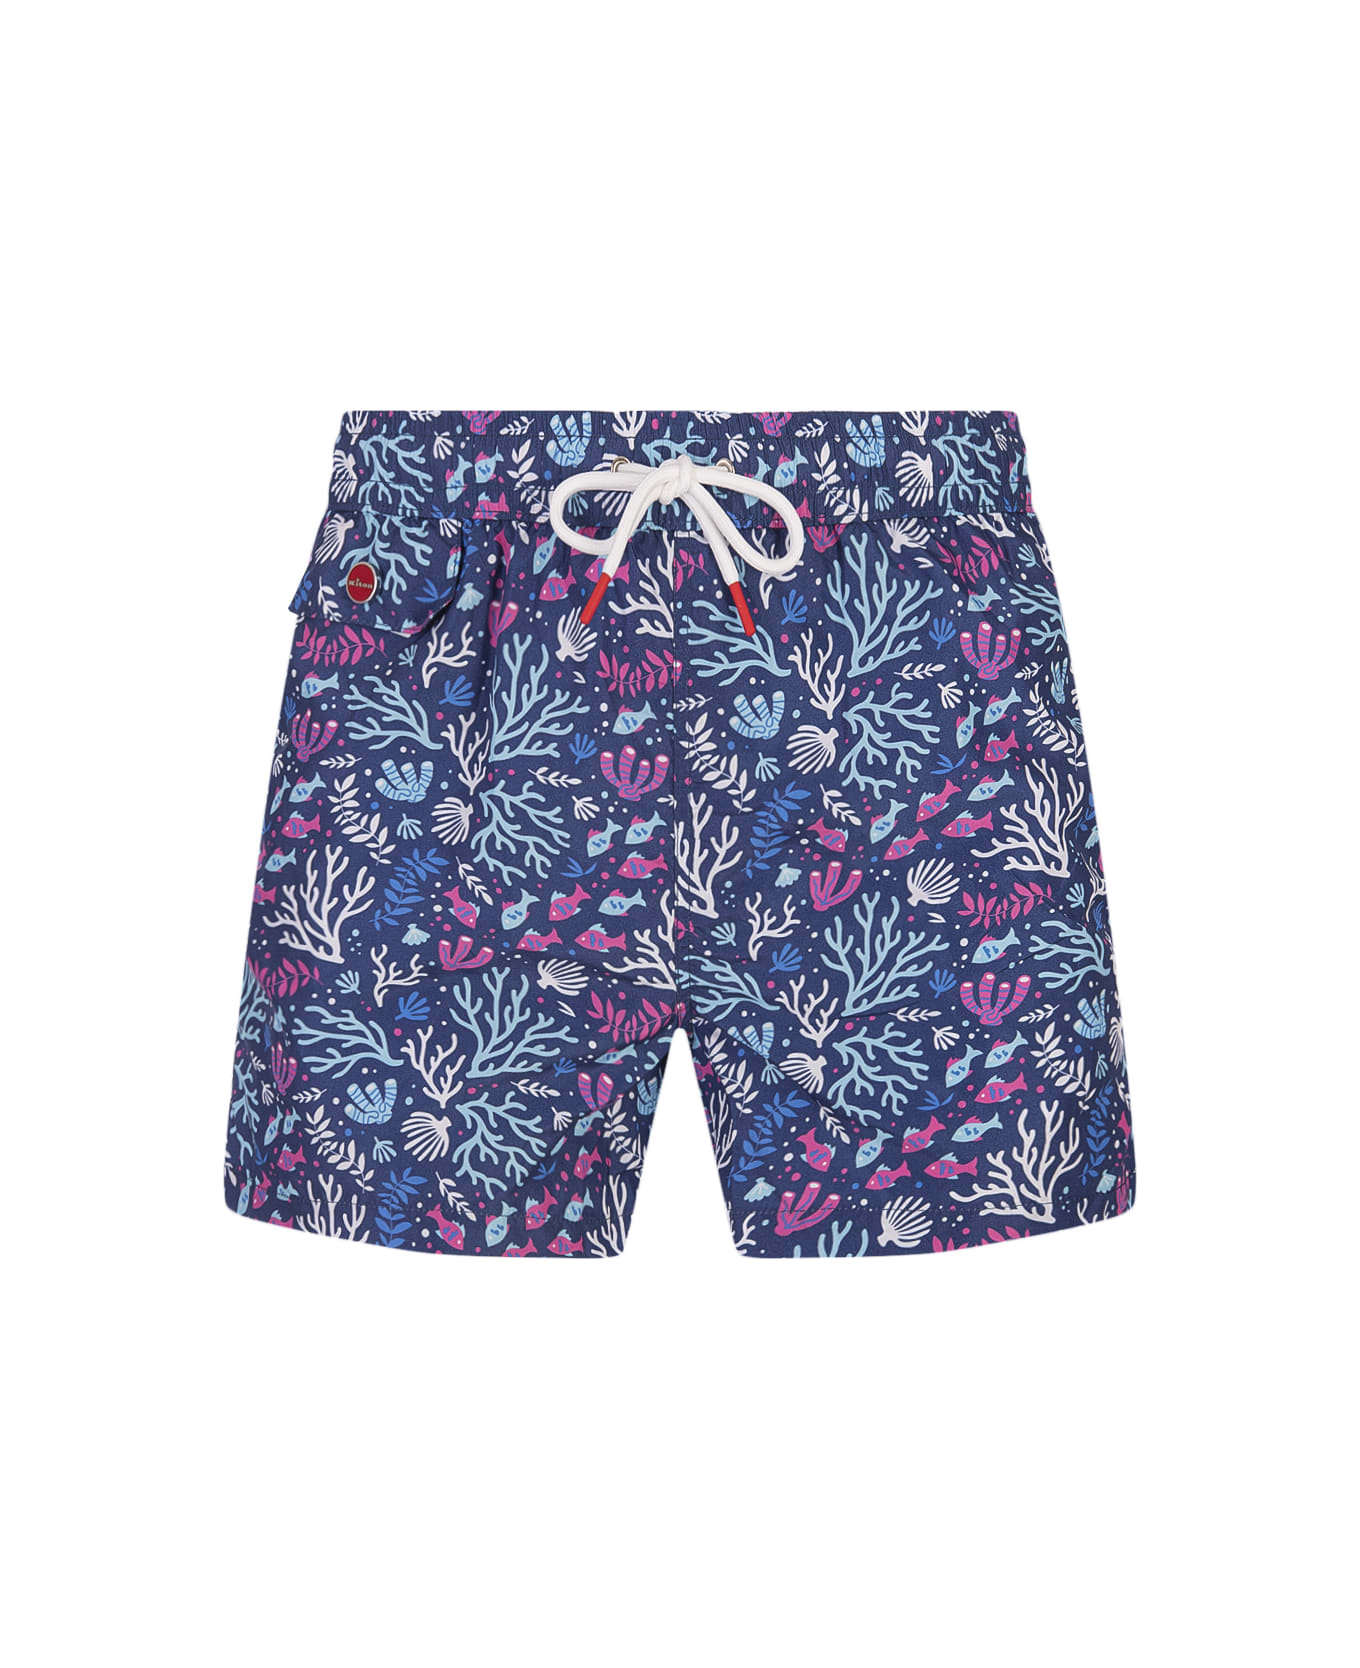 Kiton Blue Swim Shorts With Fish And Coral Pattern - Blue